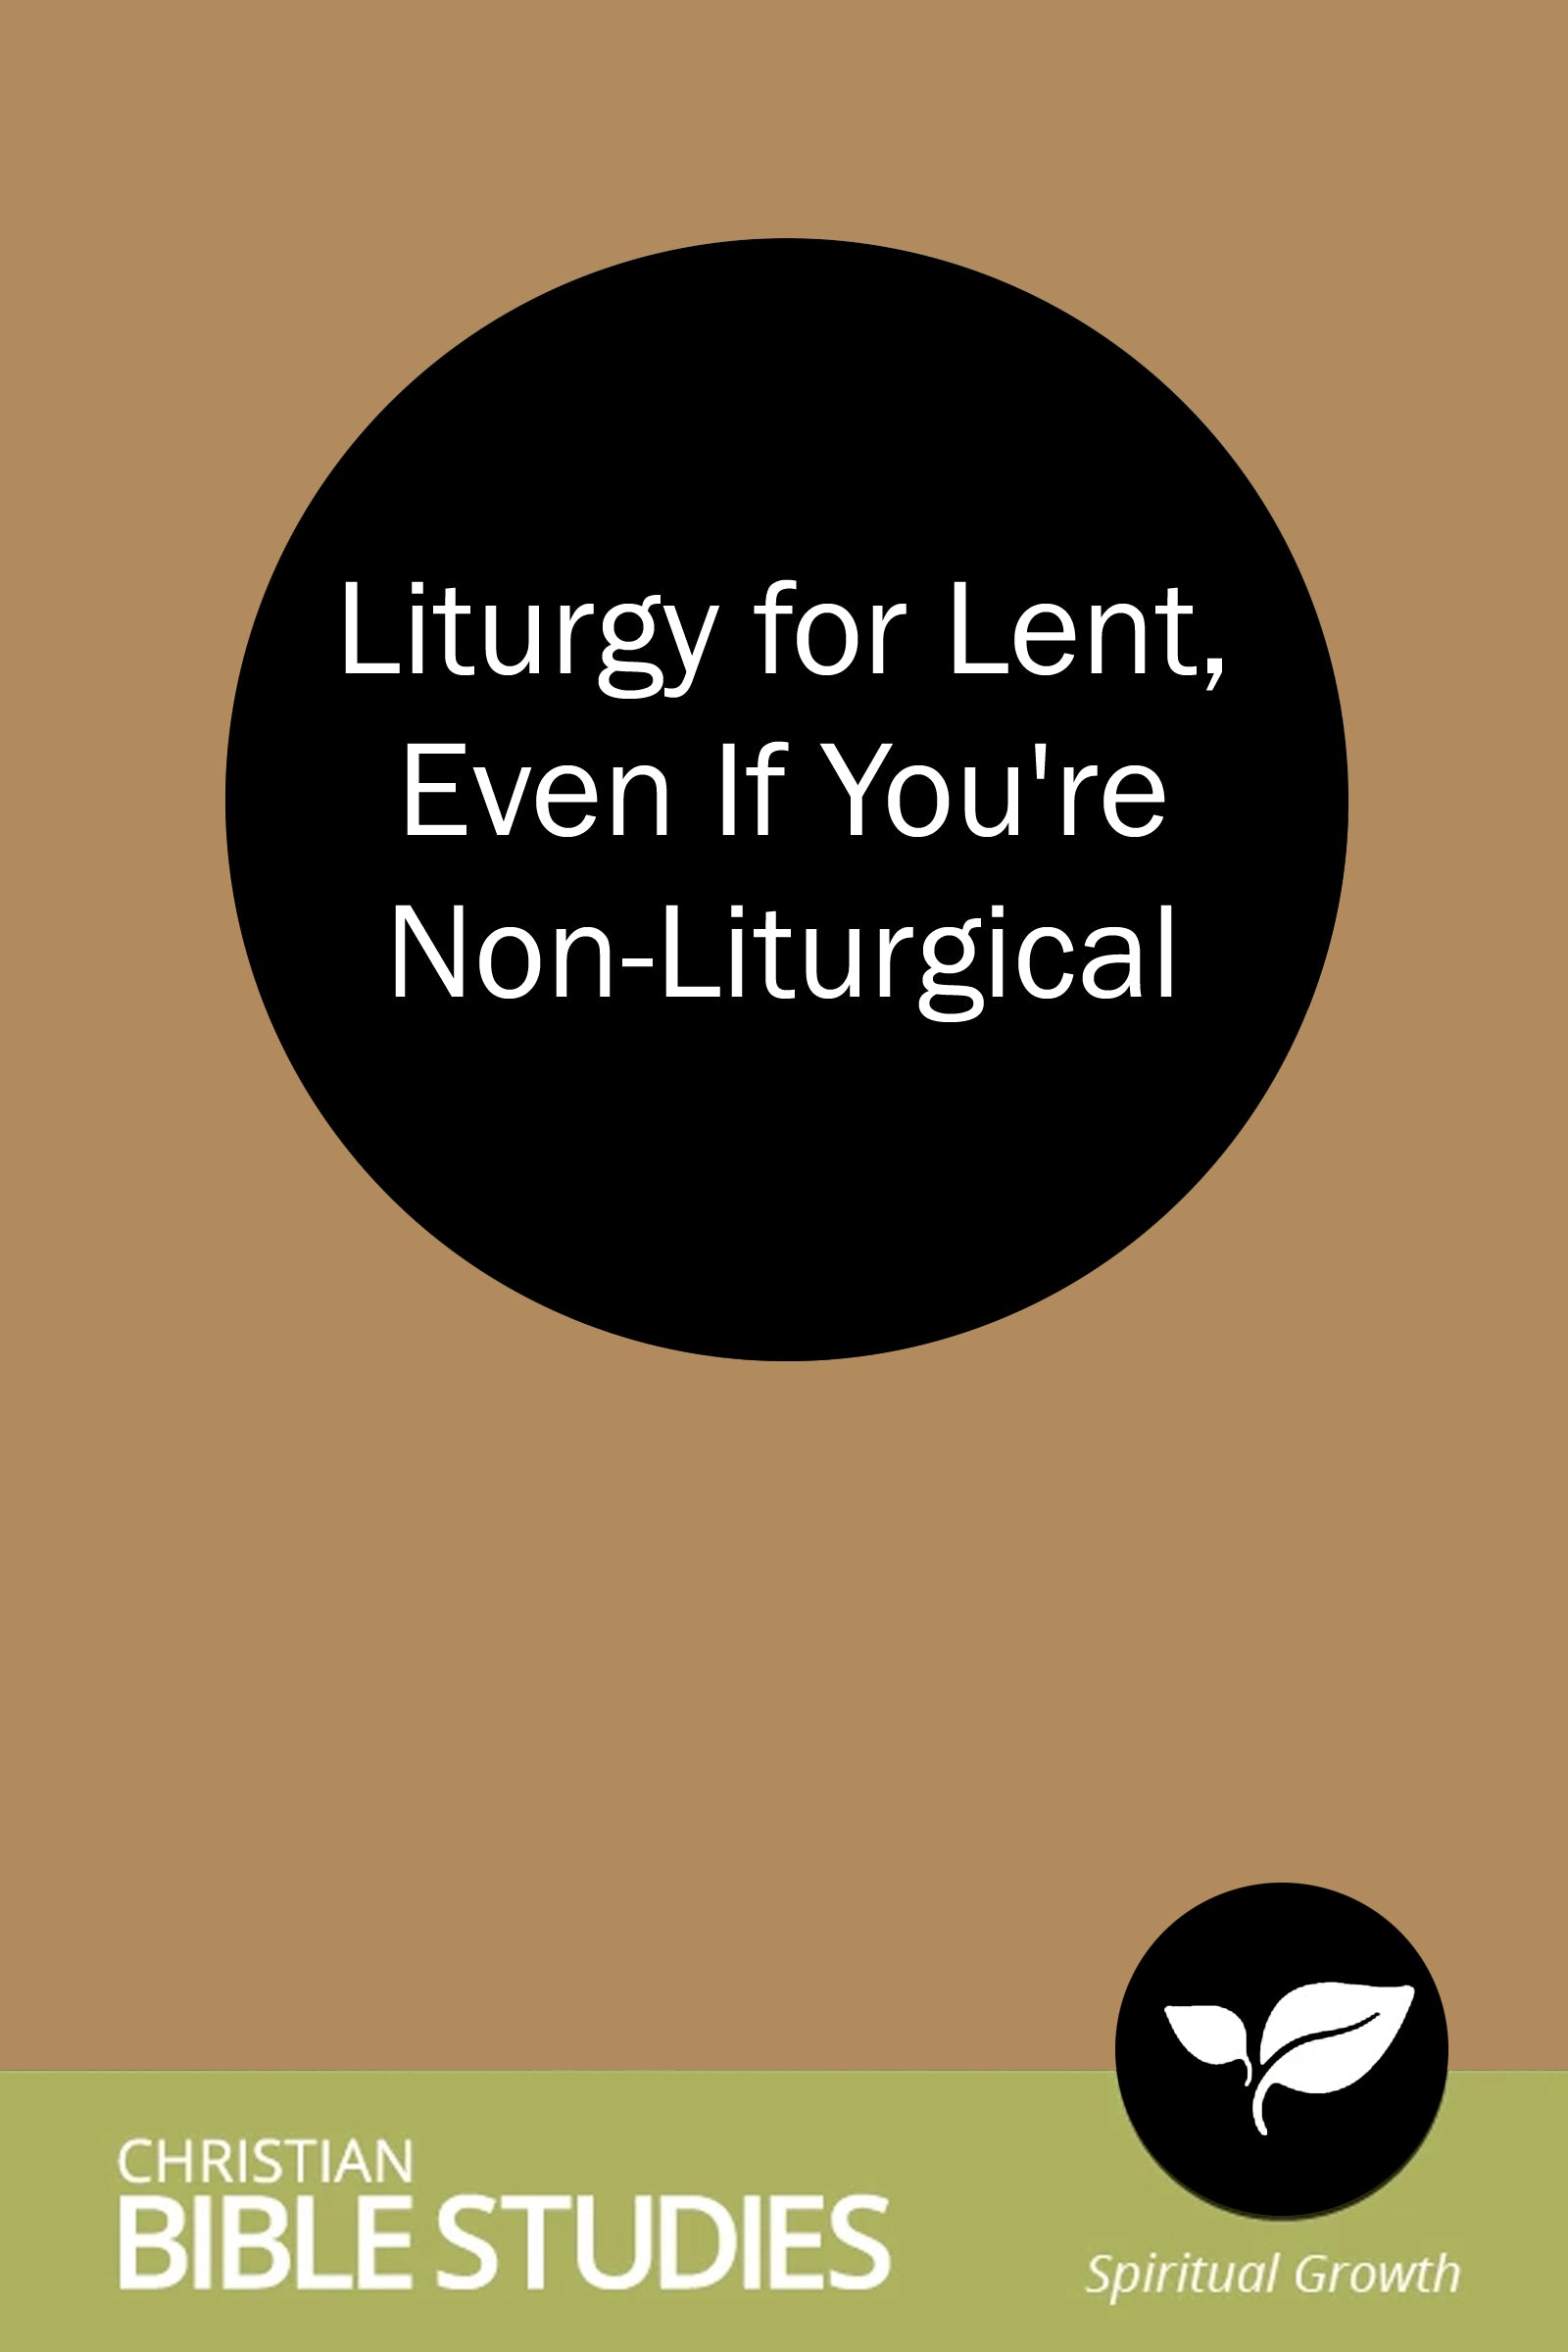 Liturgy for Lent, Even If You're Non-Liturgical